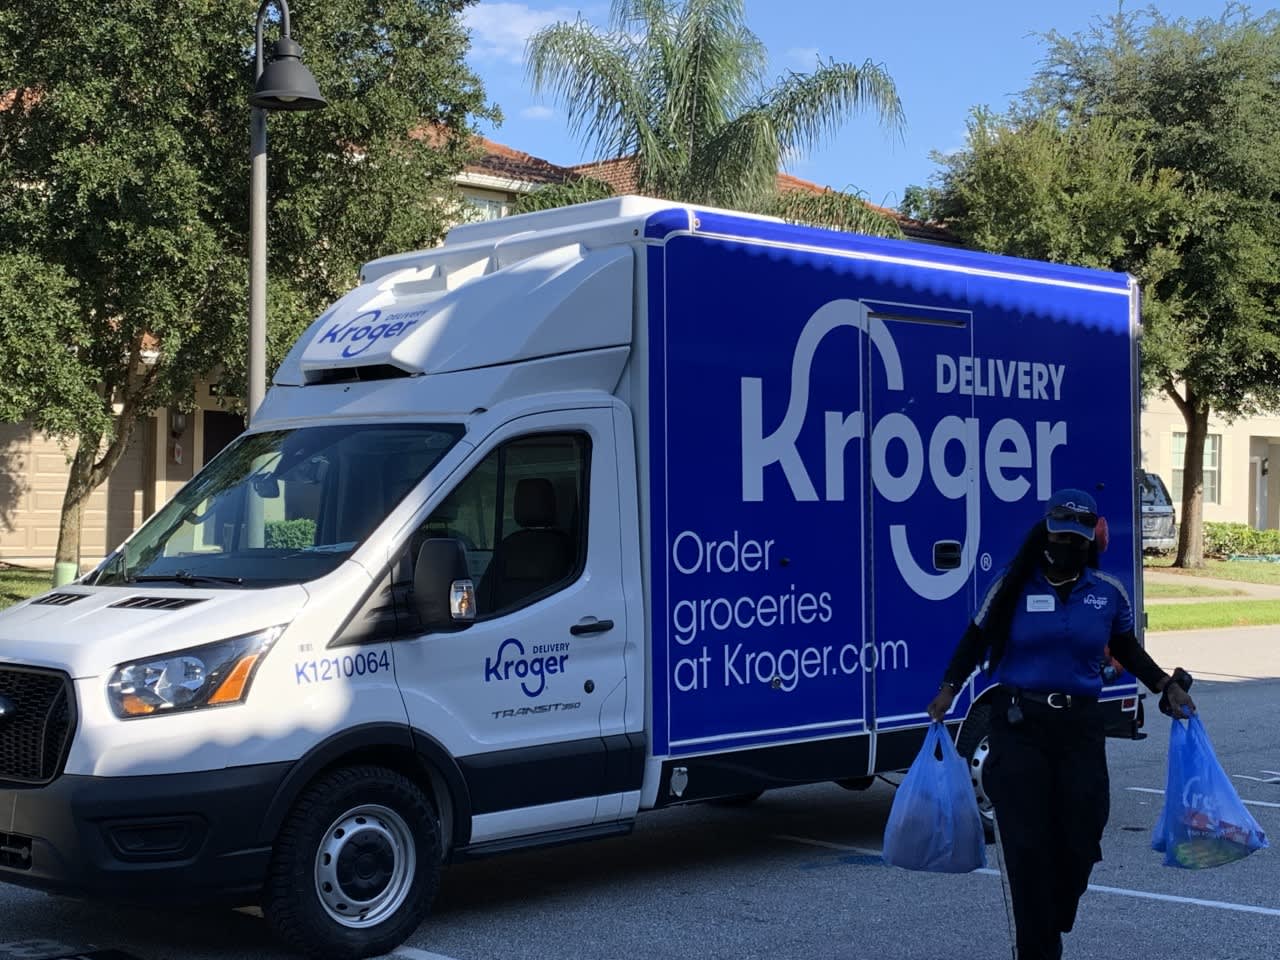 How to Track Kroger Delivery